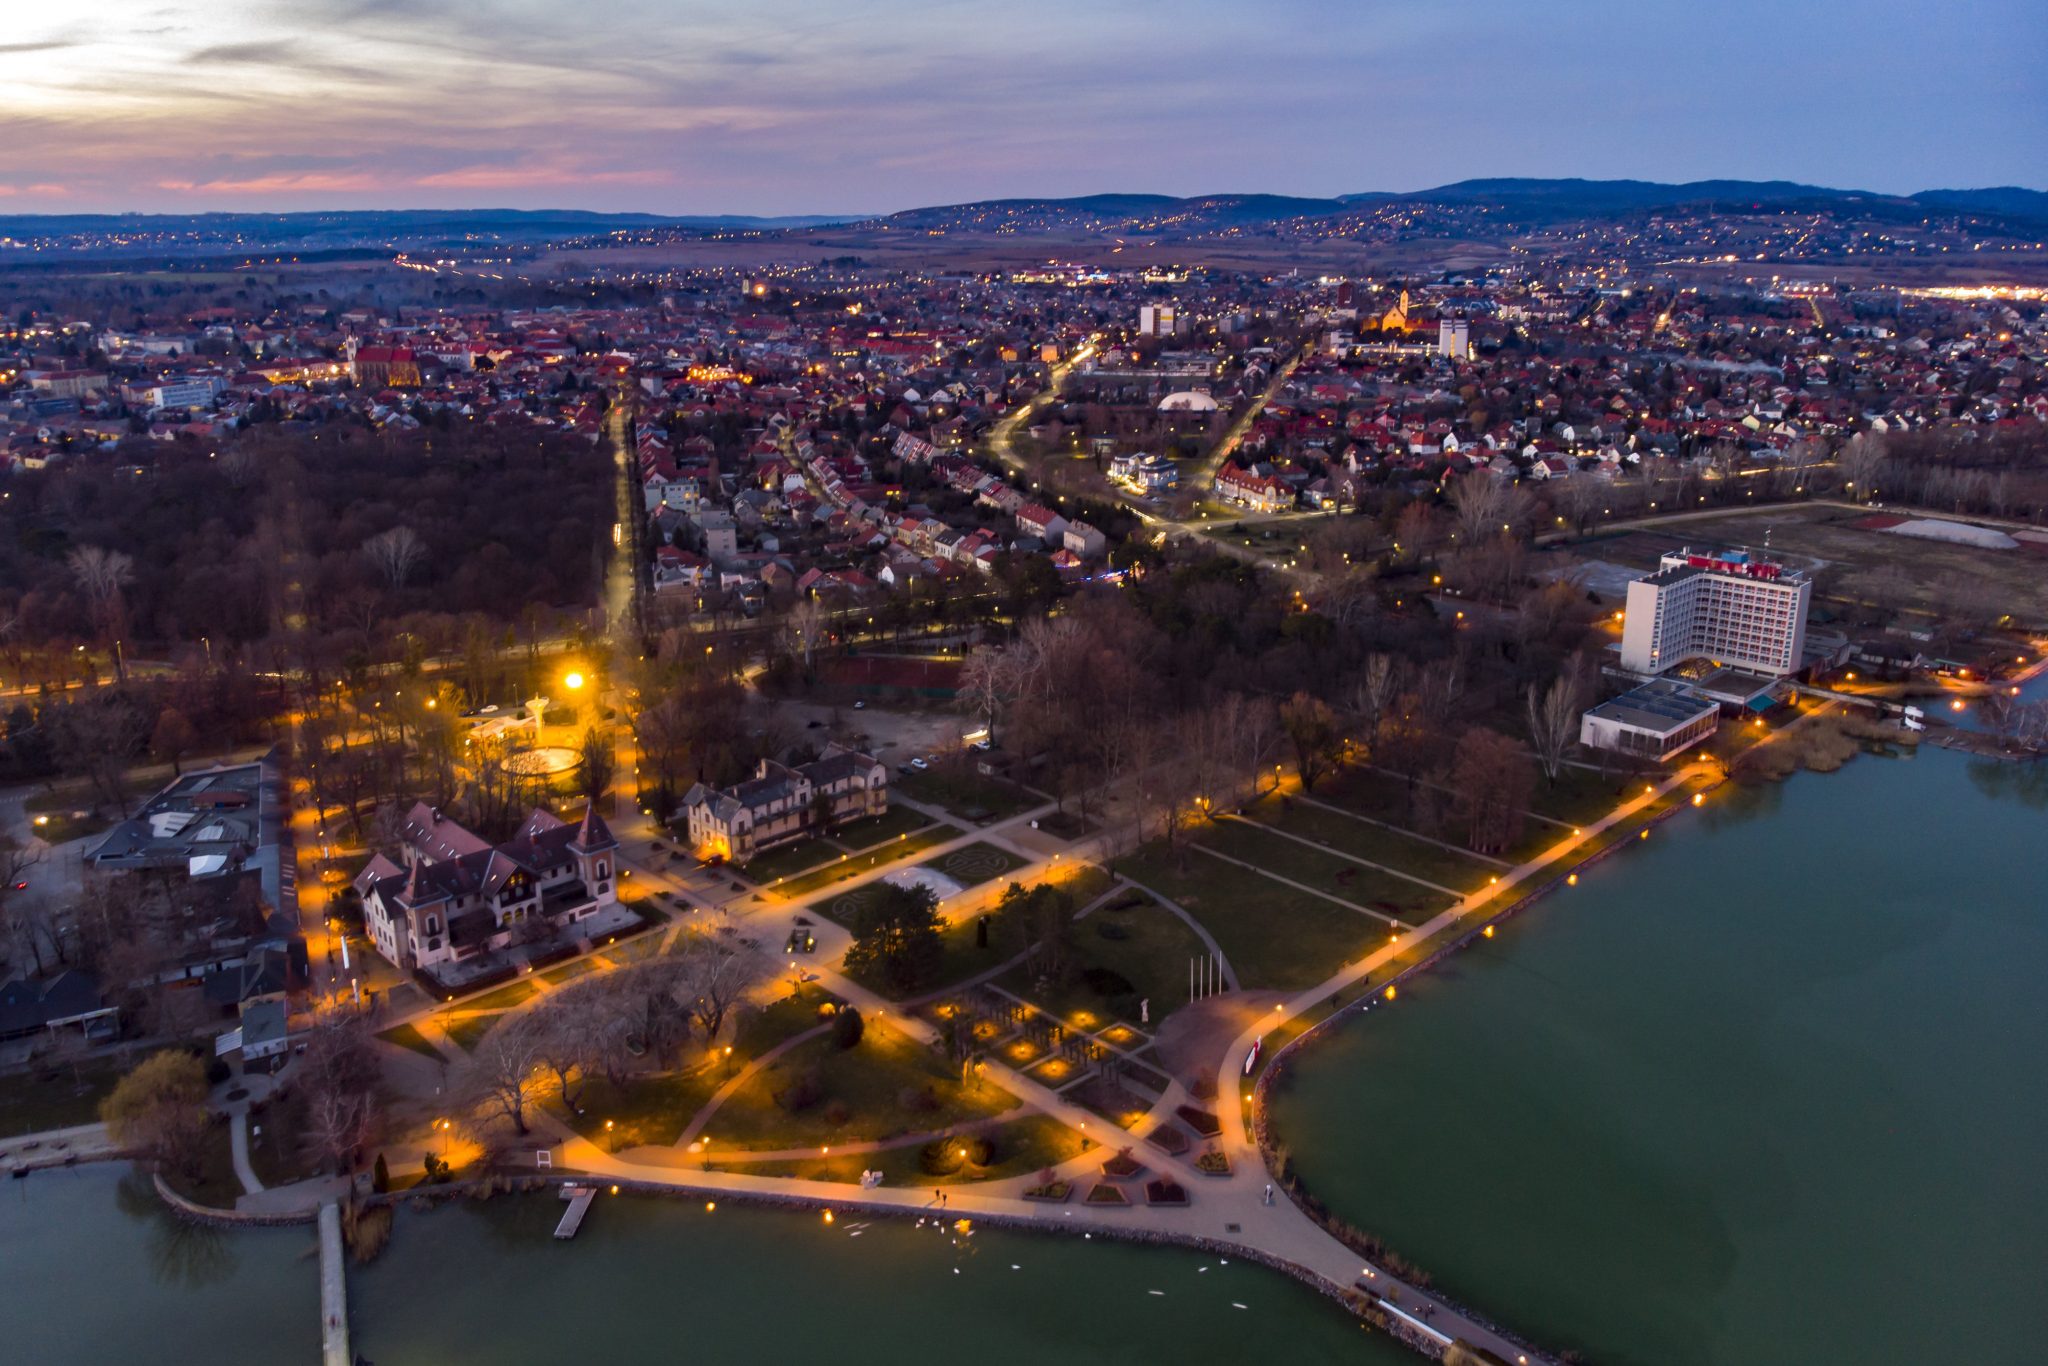 Keszthely Chosen One of Best Waterfront Cities in Europe